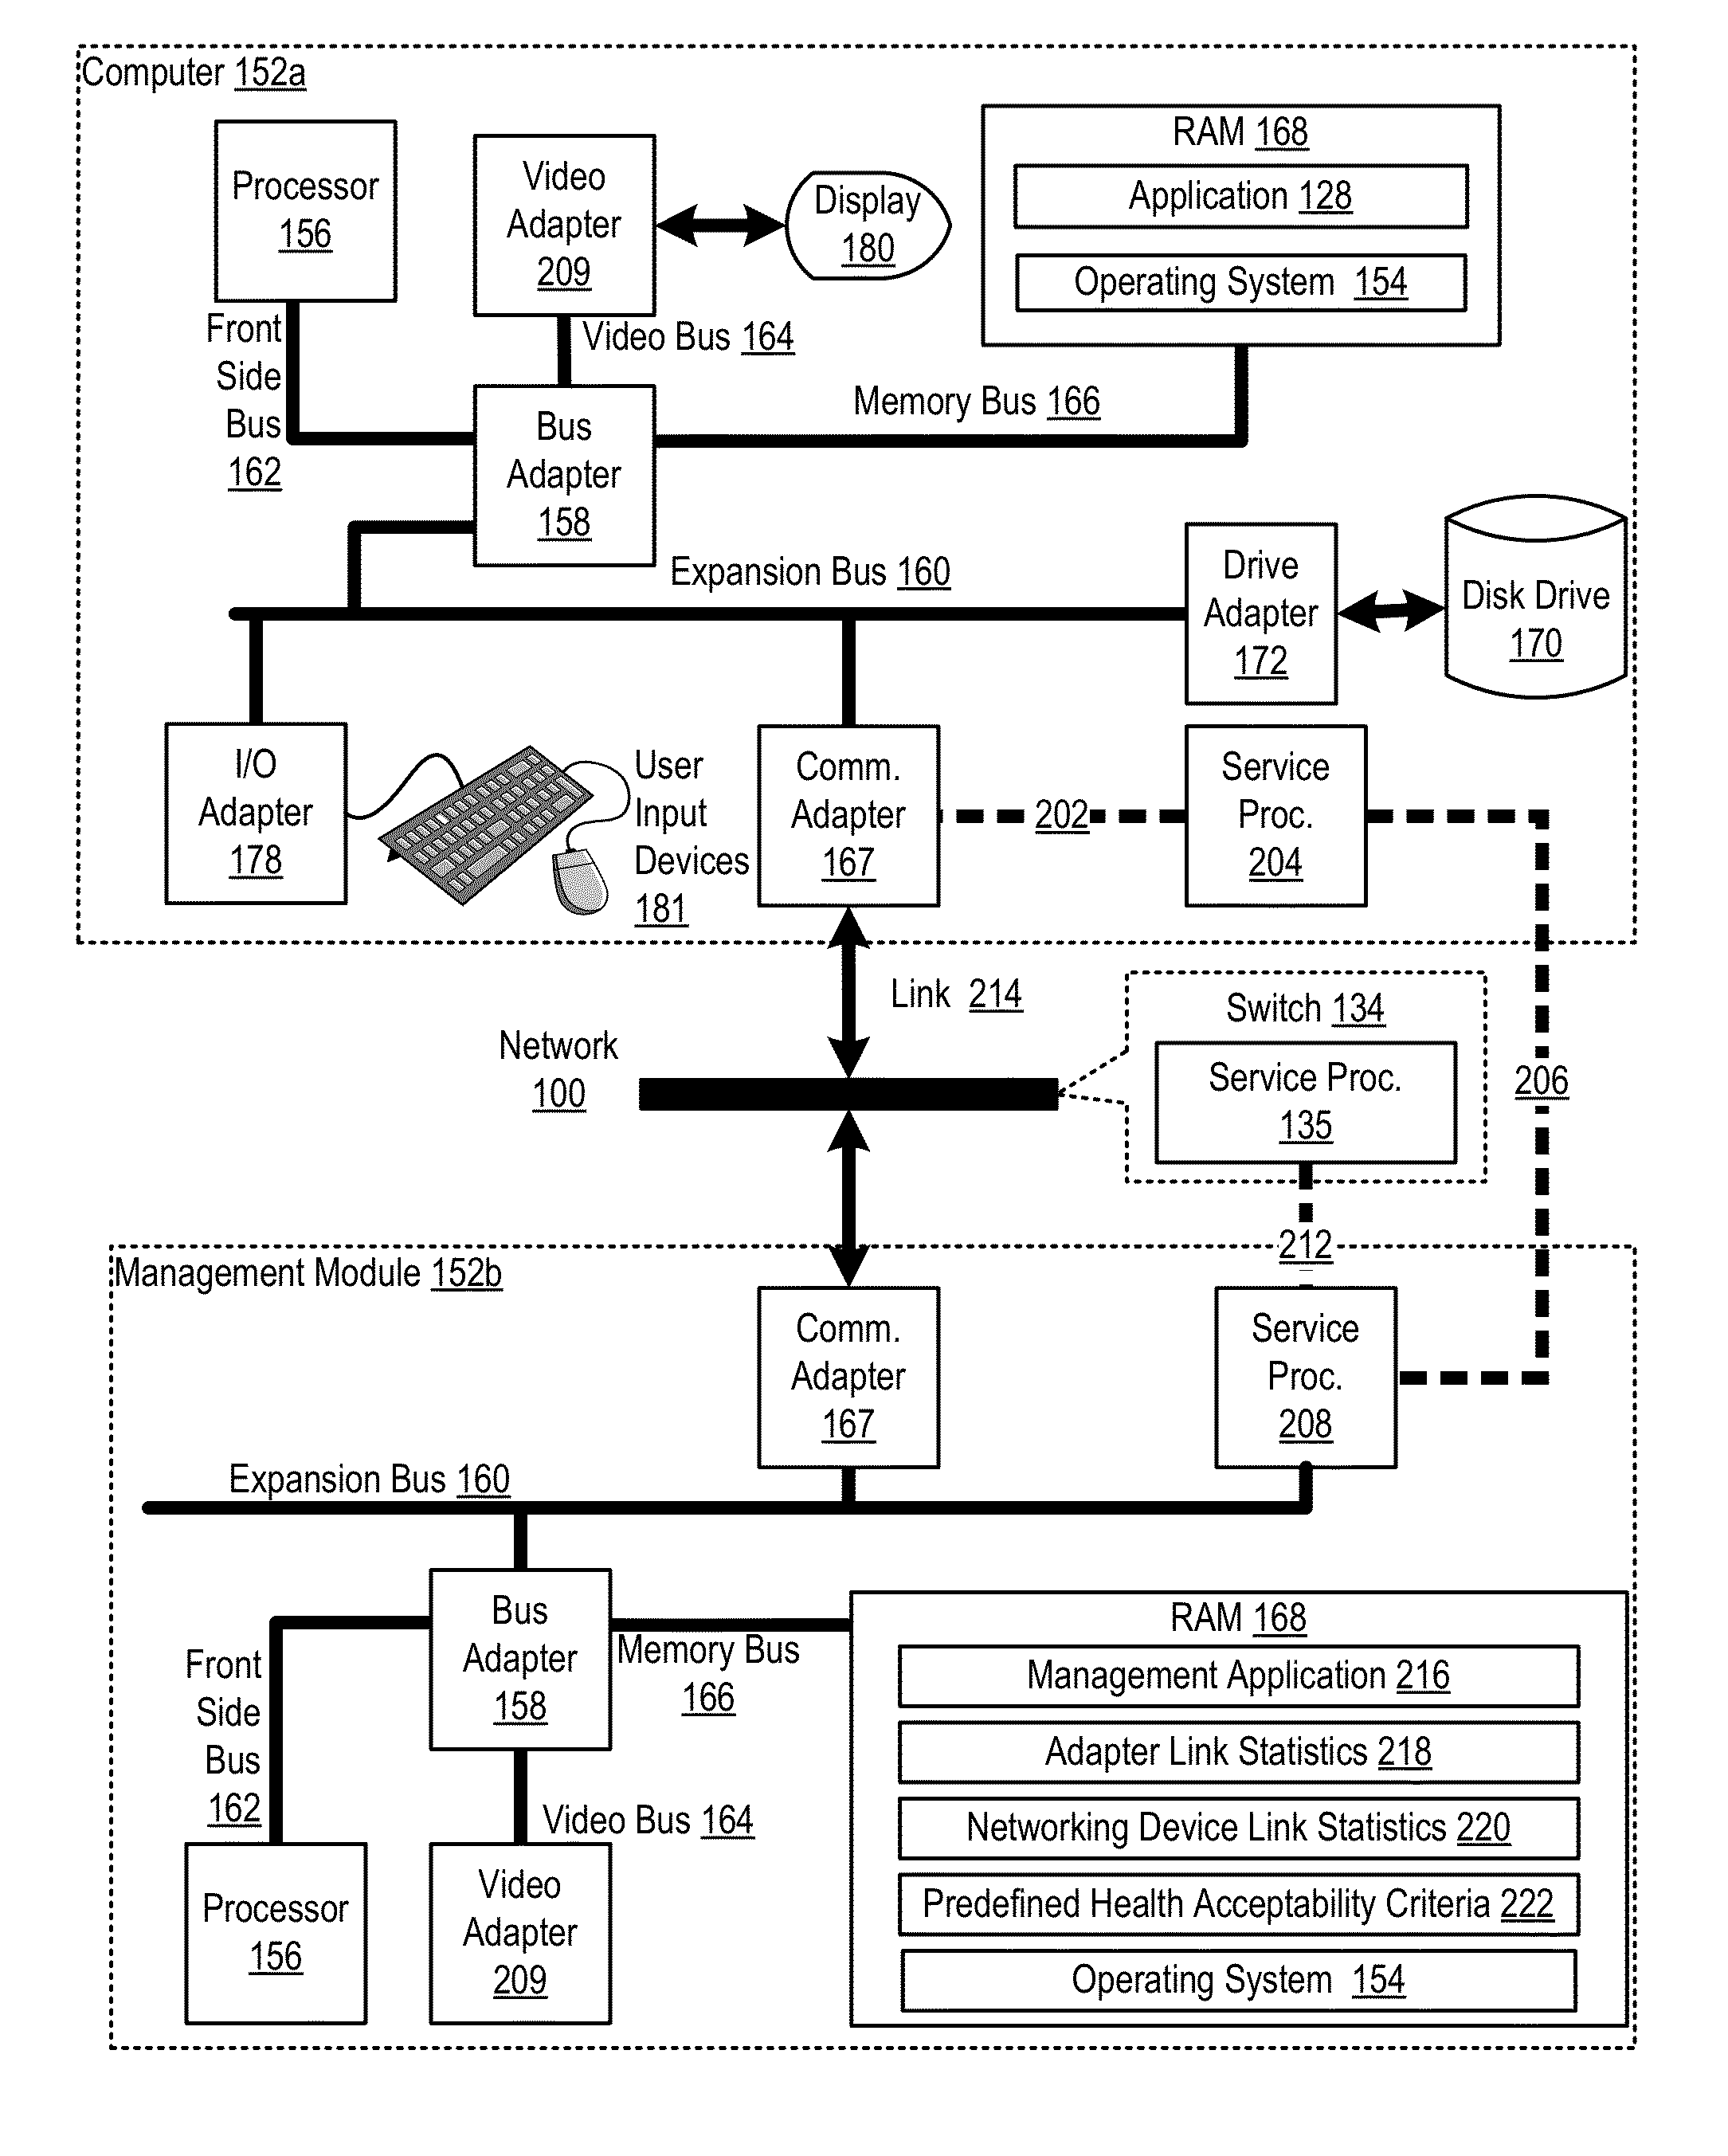 Managing stability of a link coupling an adapter of a computing system to a port of a networking device for in-band data communications